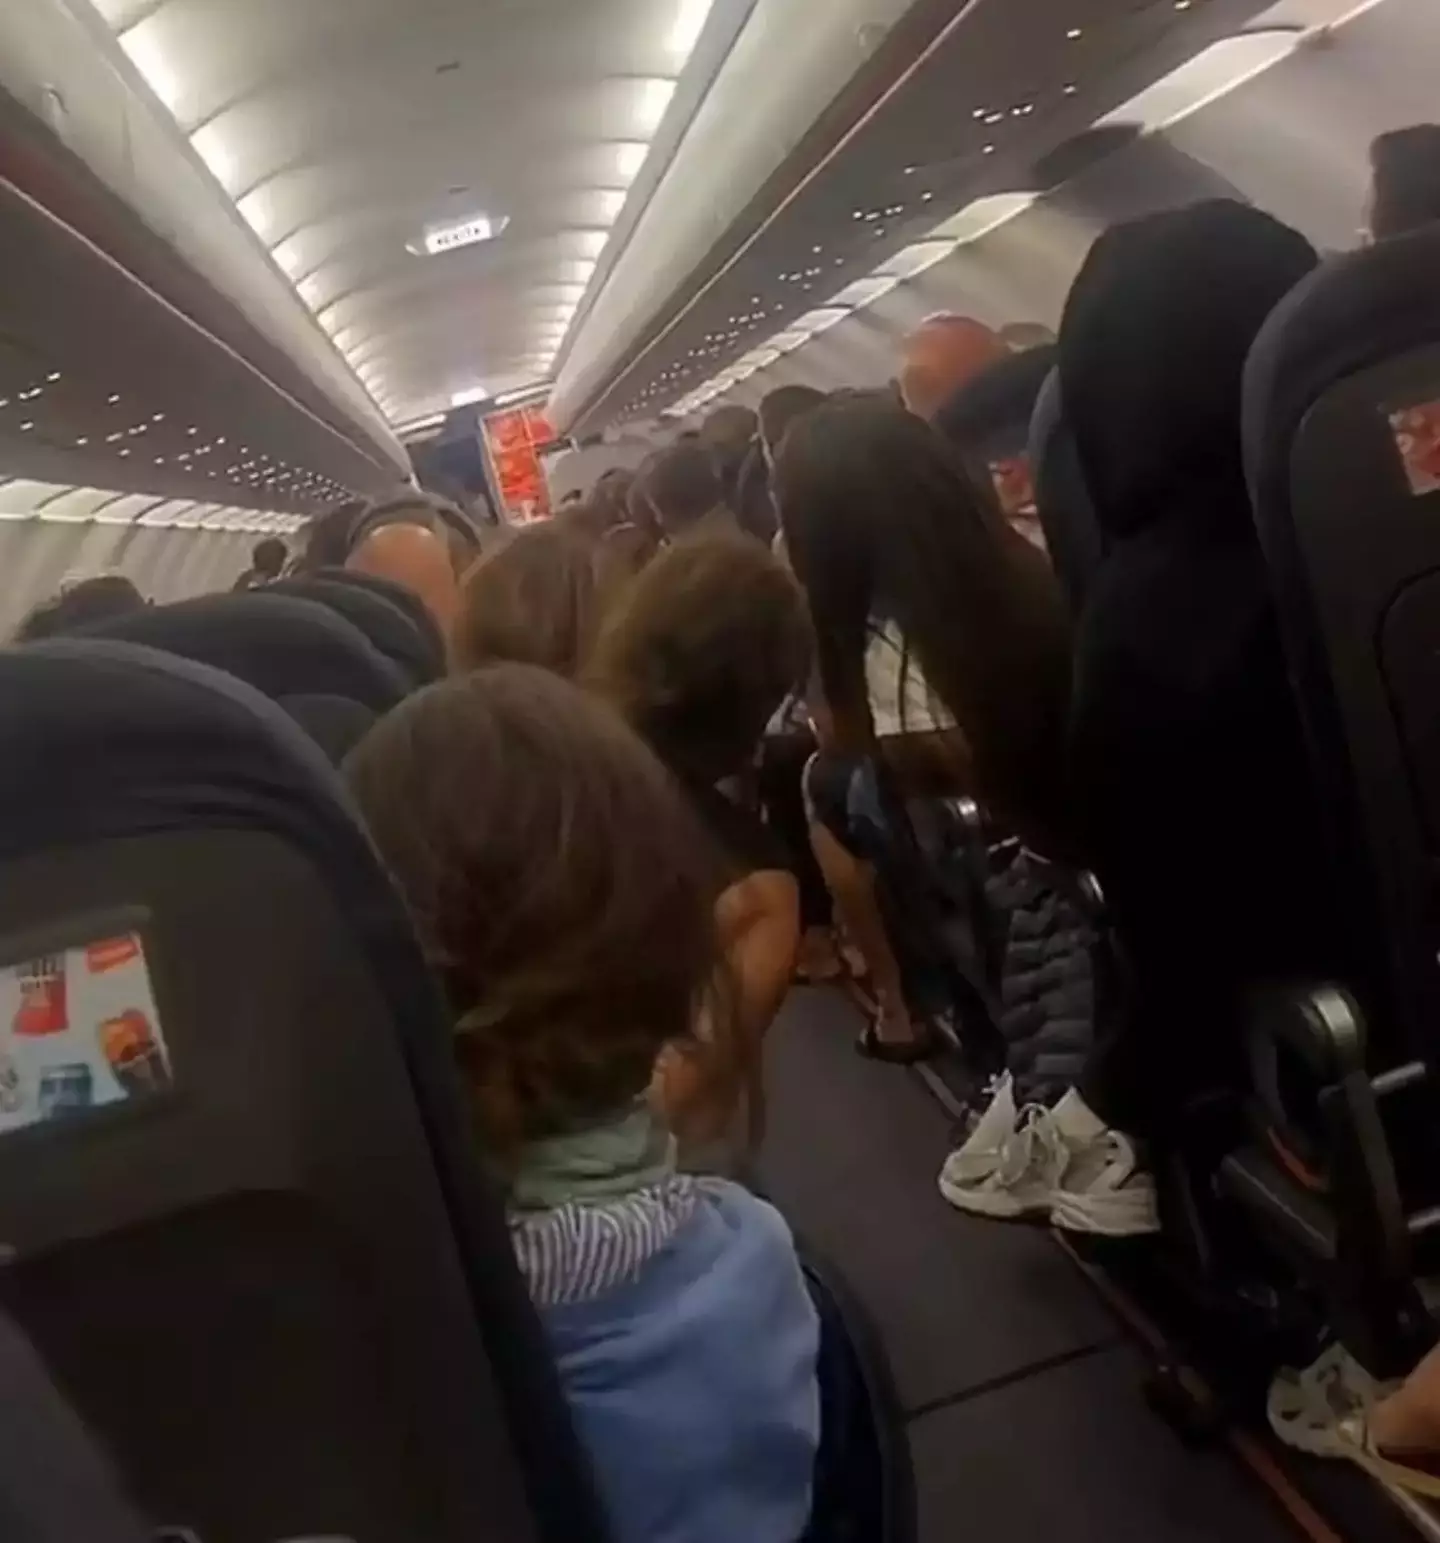 The flight was cancelled after someone defecated on the floor.